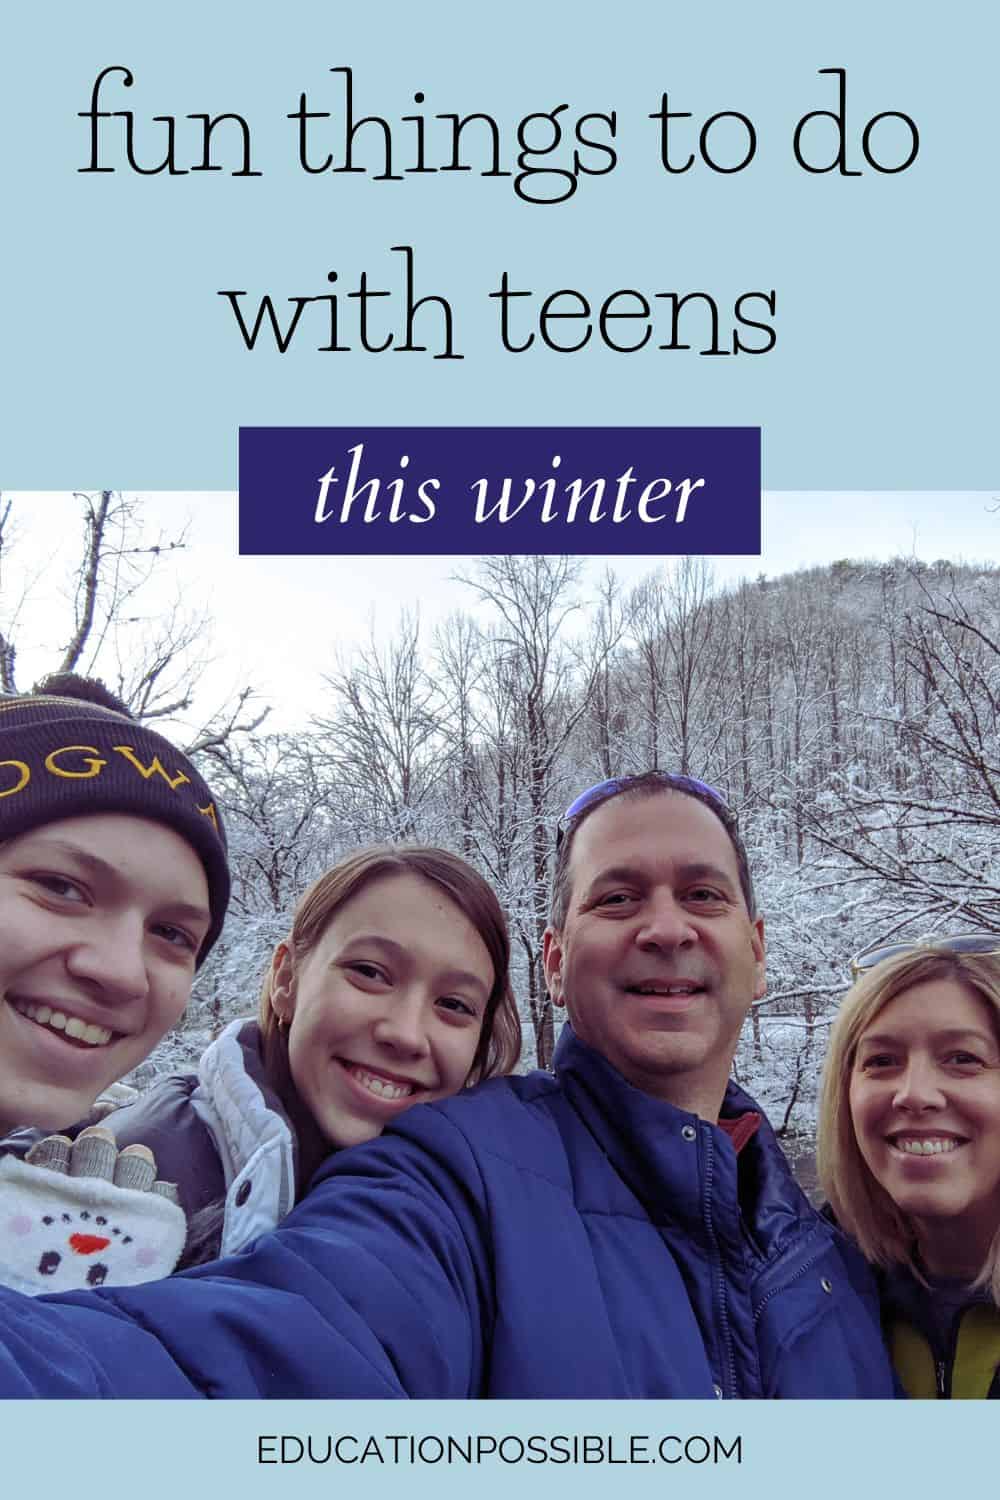 Mom, dad and two teen girls outside with snowy trees and hill behind them